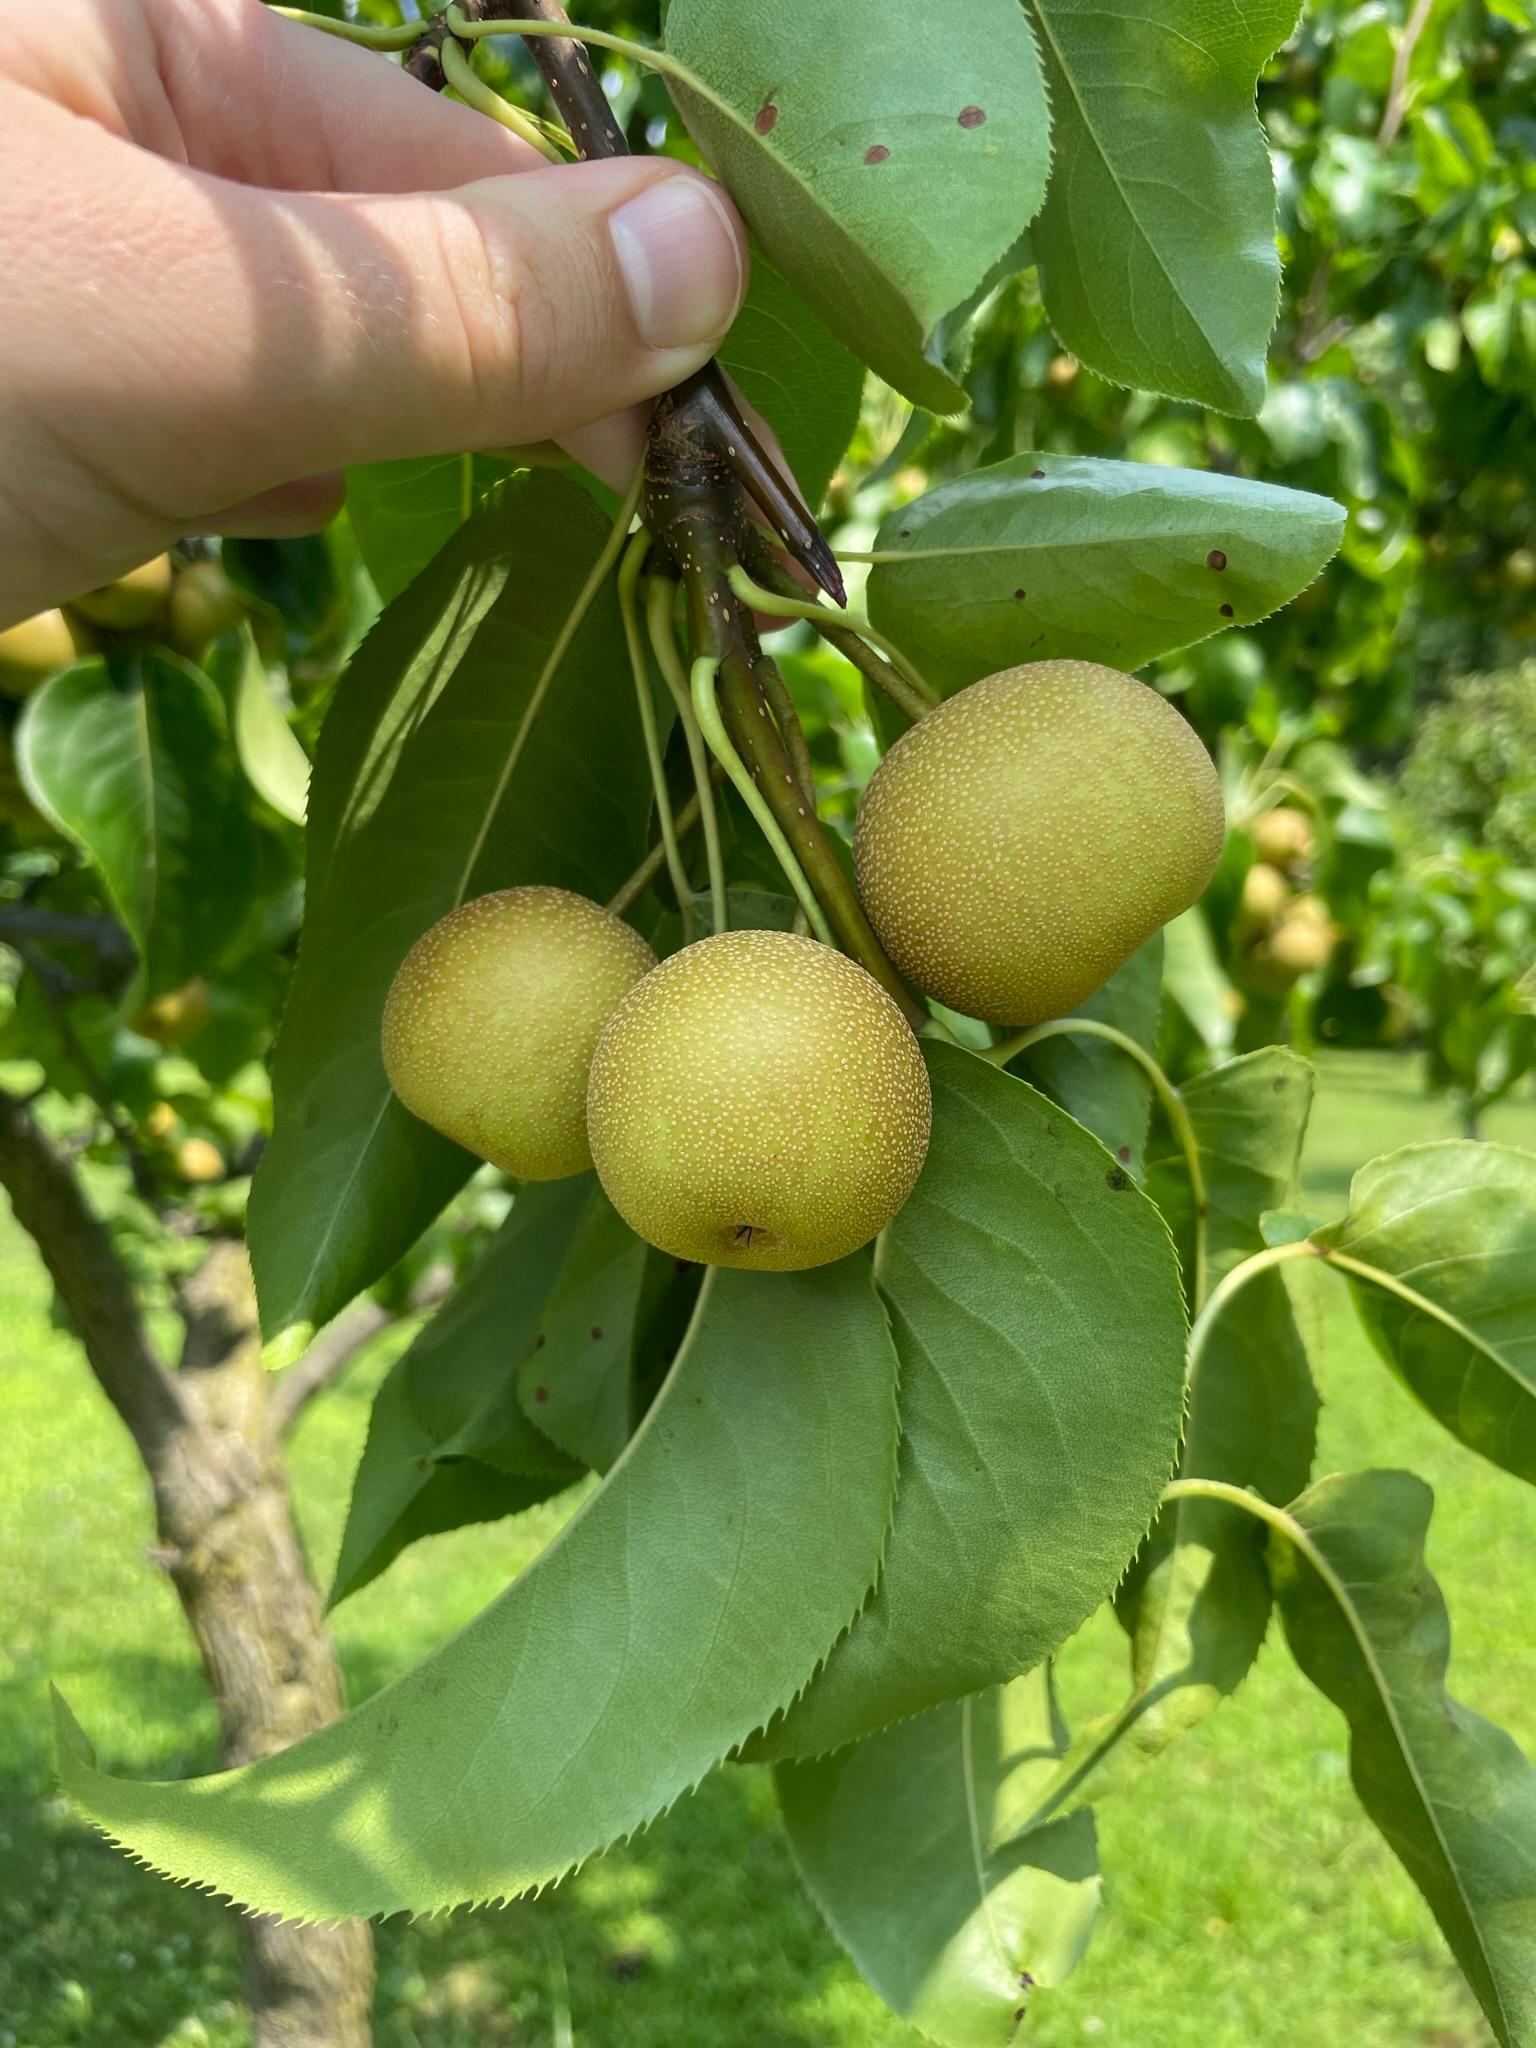 An Asian pear fruit hanging from a tree.